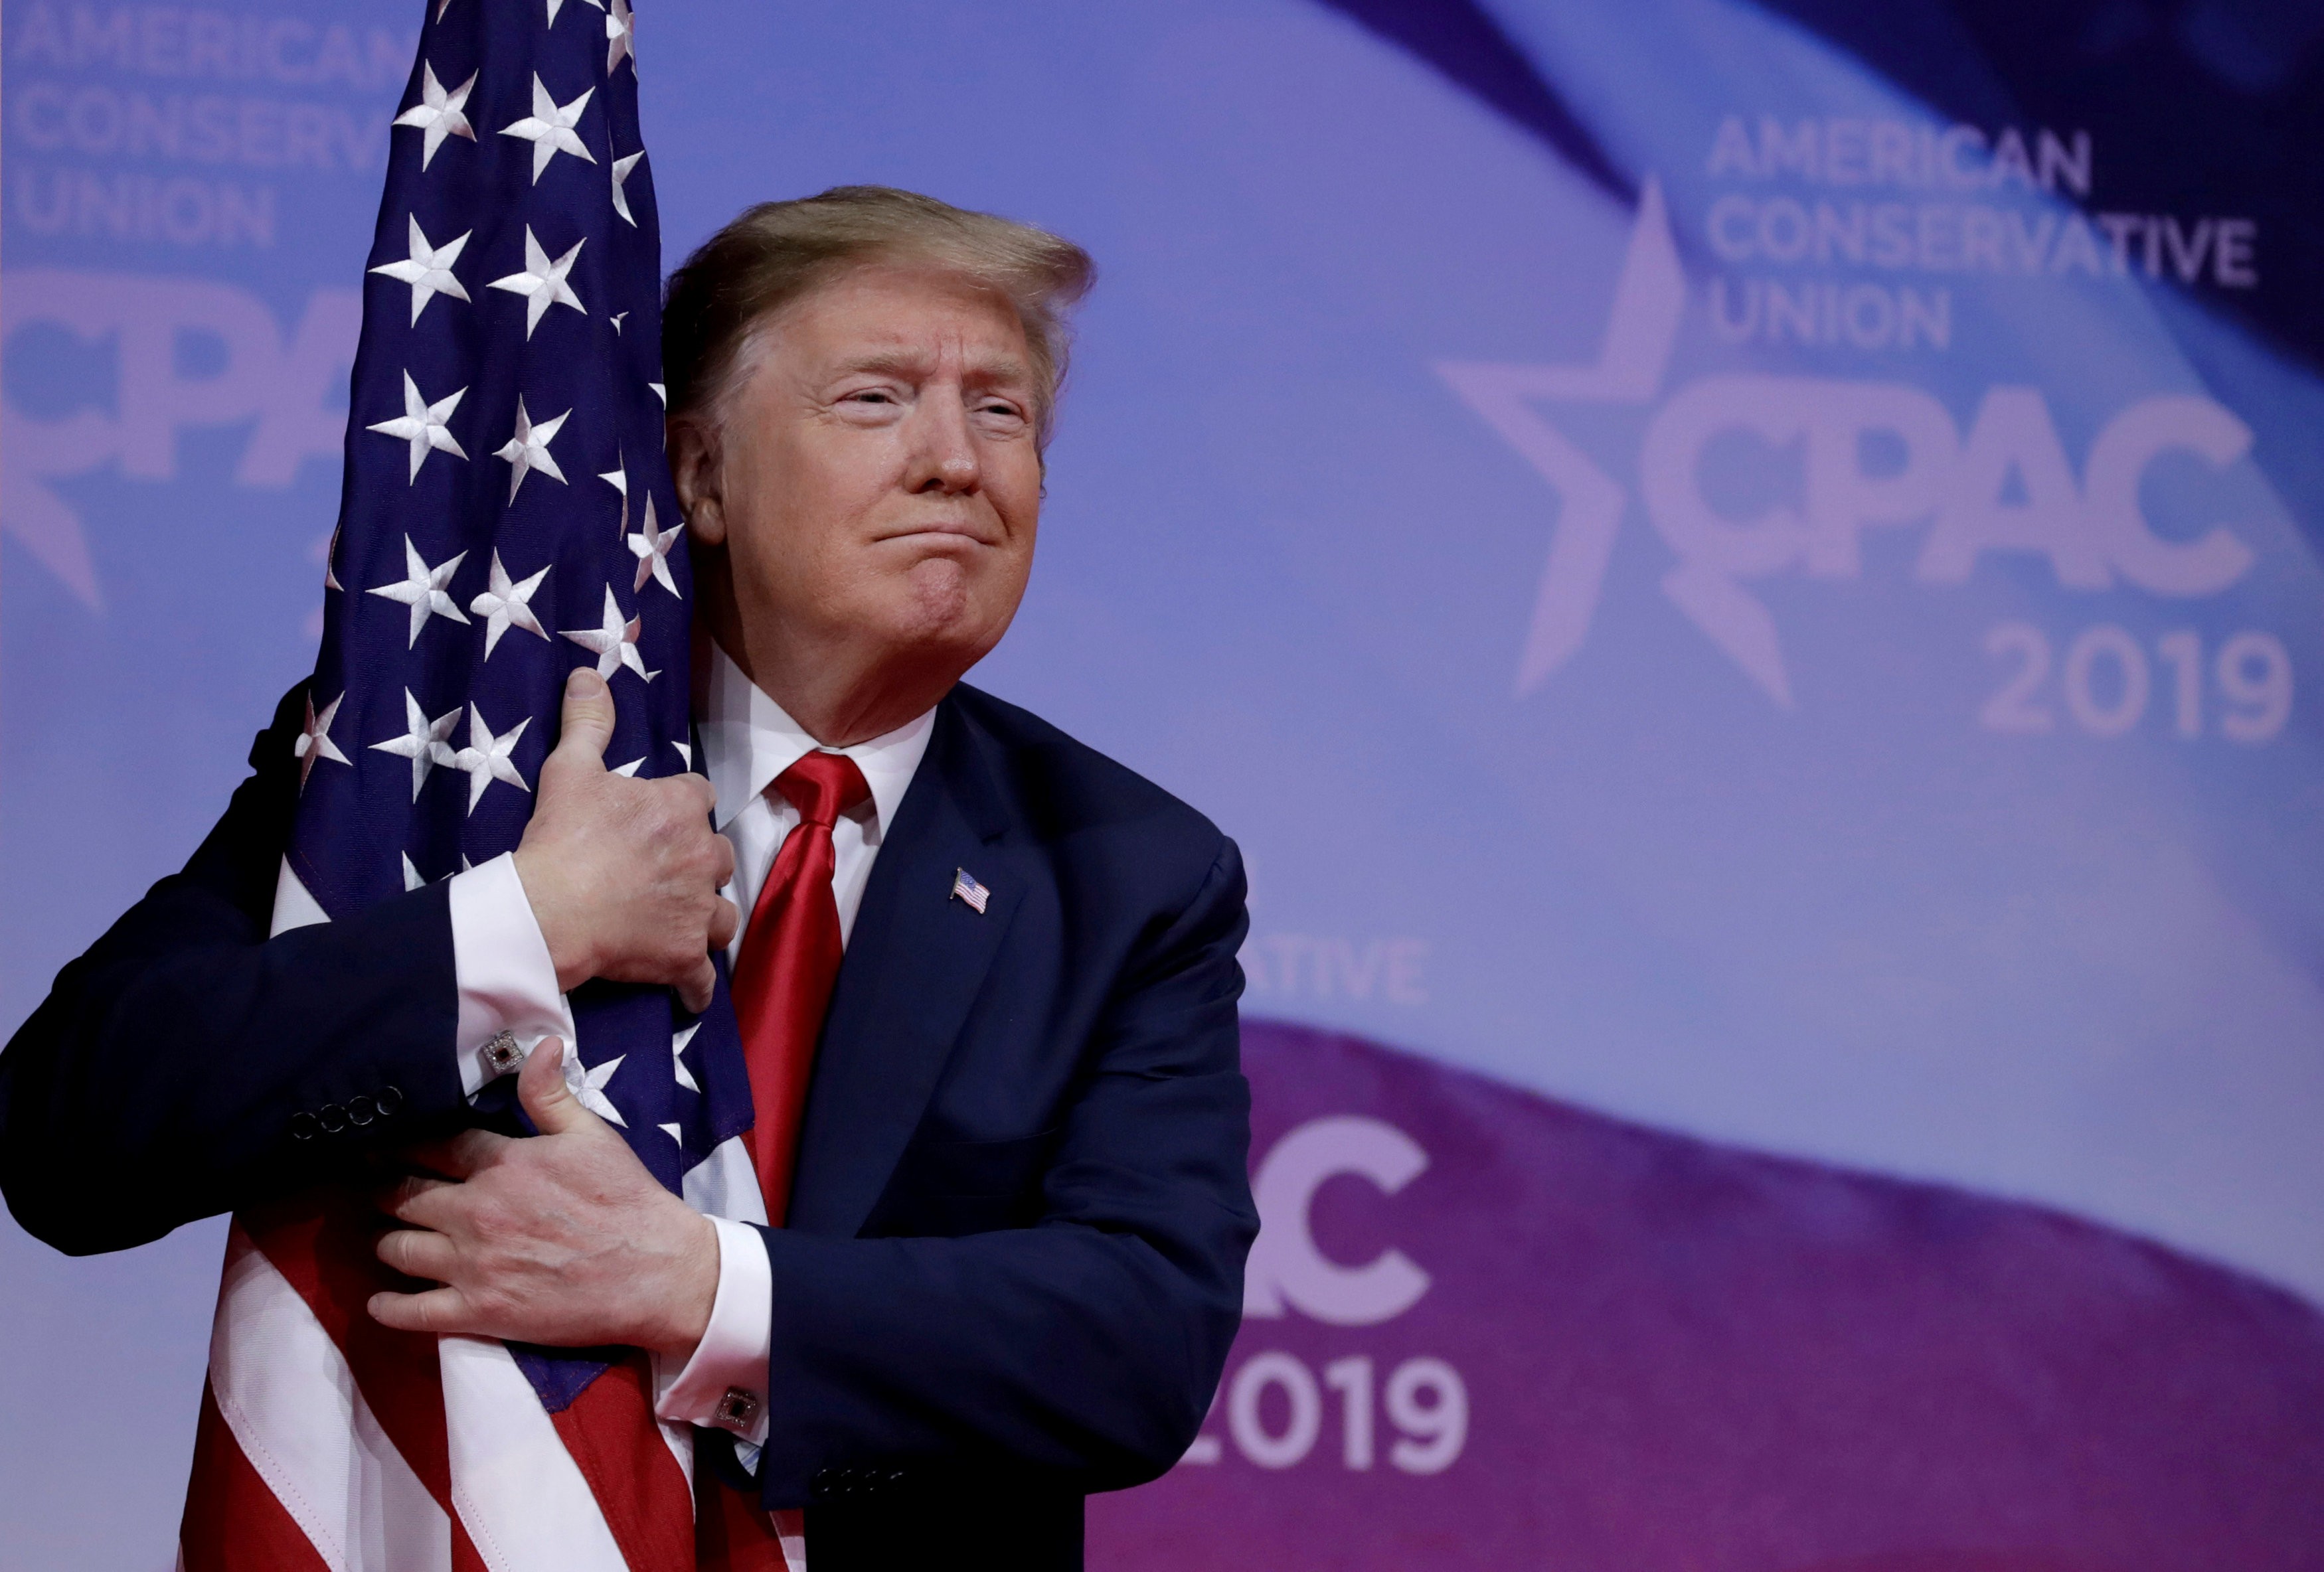 US President Donald Trump hugs the American flag at the Conservative Political Action Conference annual meeting near Washington on March 2. Photo: Reuters